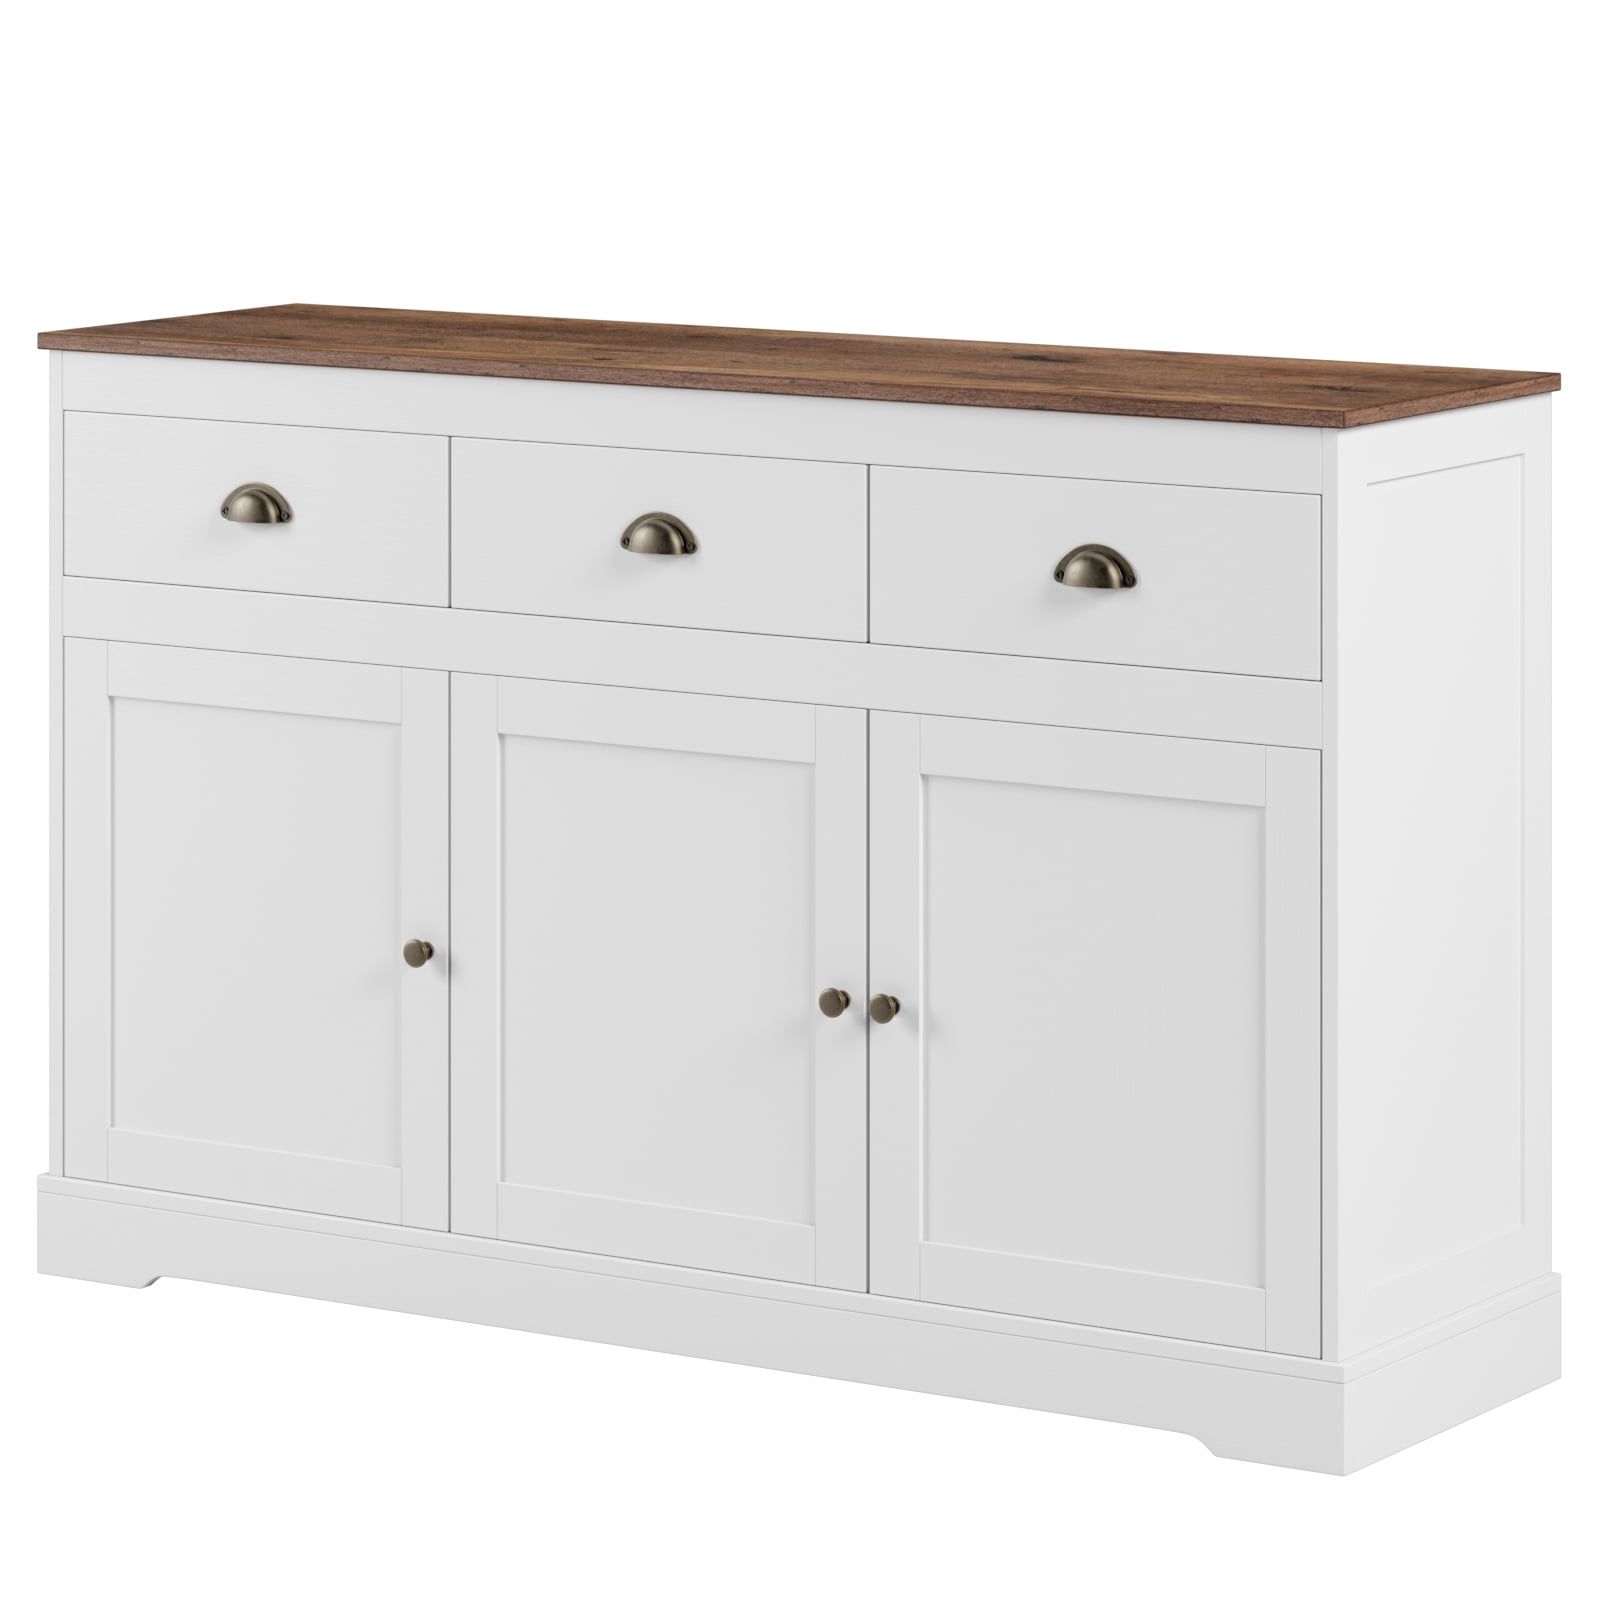 2020 Sideboard Storage Cabinet With 3 Drawers & 3 Doors With Homfa Sideboard Storage Cabinet With 3 Drawers & 3 Doors, 53.54'' Wide Buffet  Cabinet For Dining Room, White – Walmart (Photo 2 of 10)